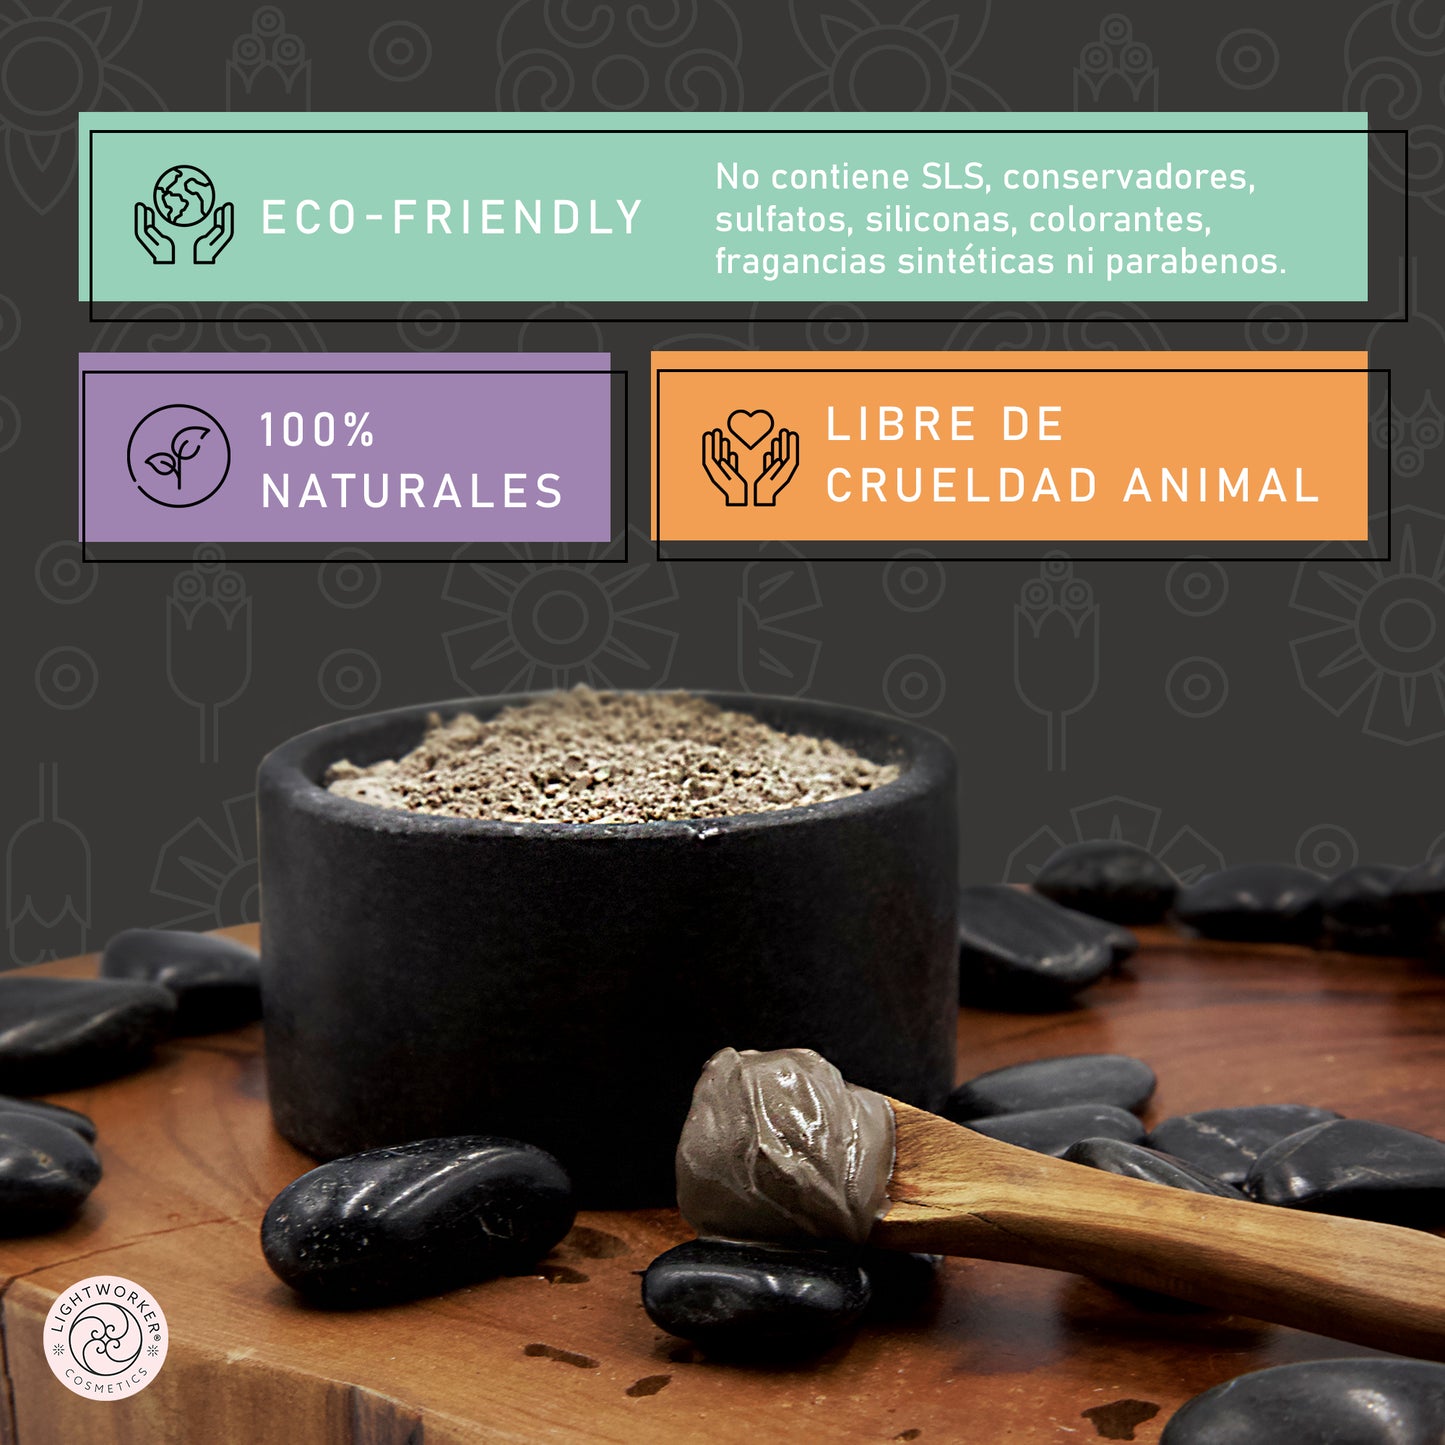 Volcanic Black Healing Clay/ Arcilla volcánica